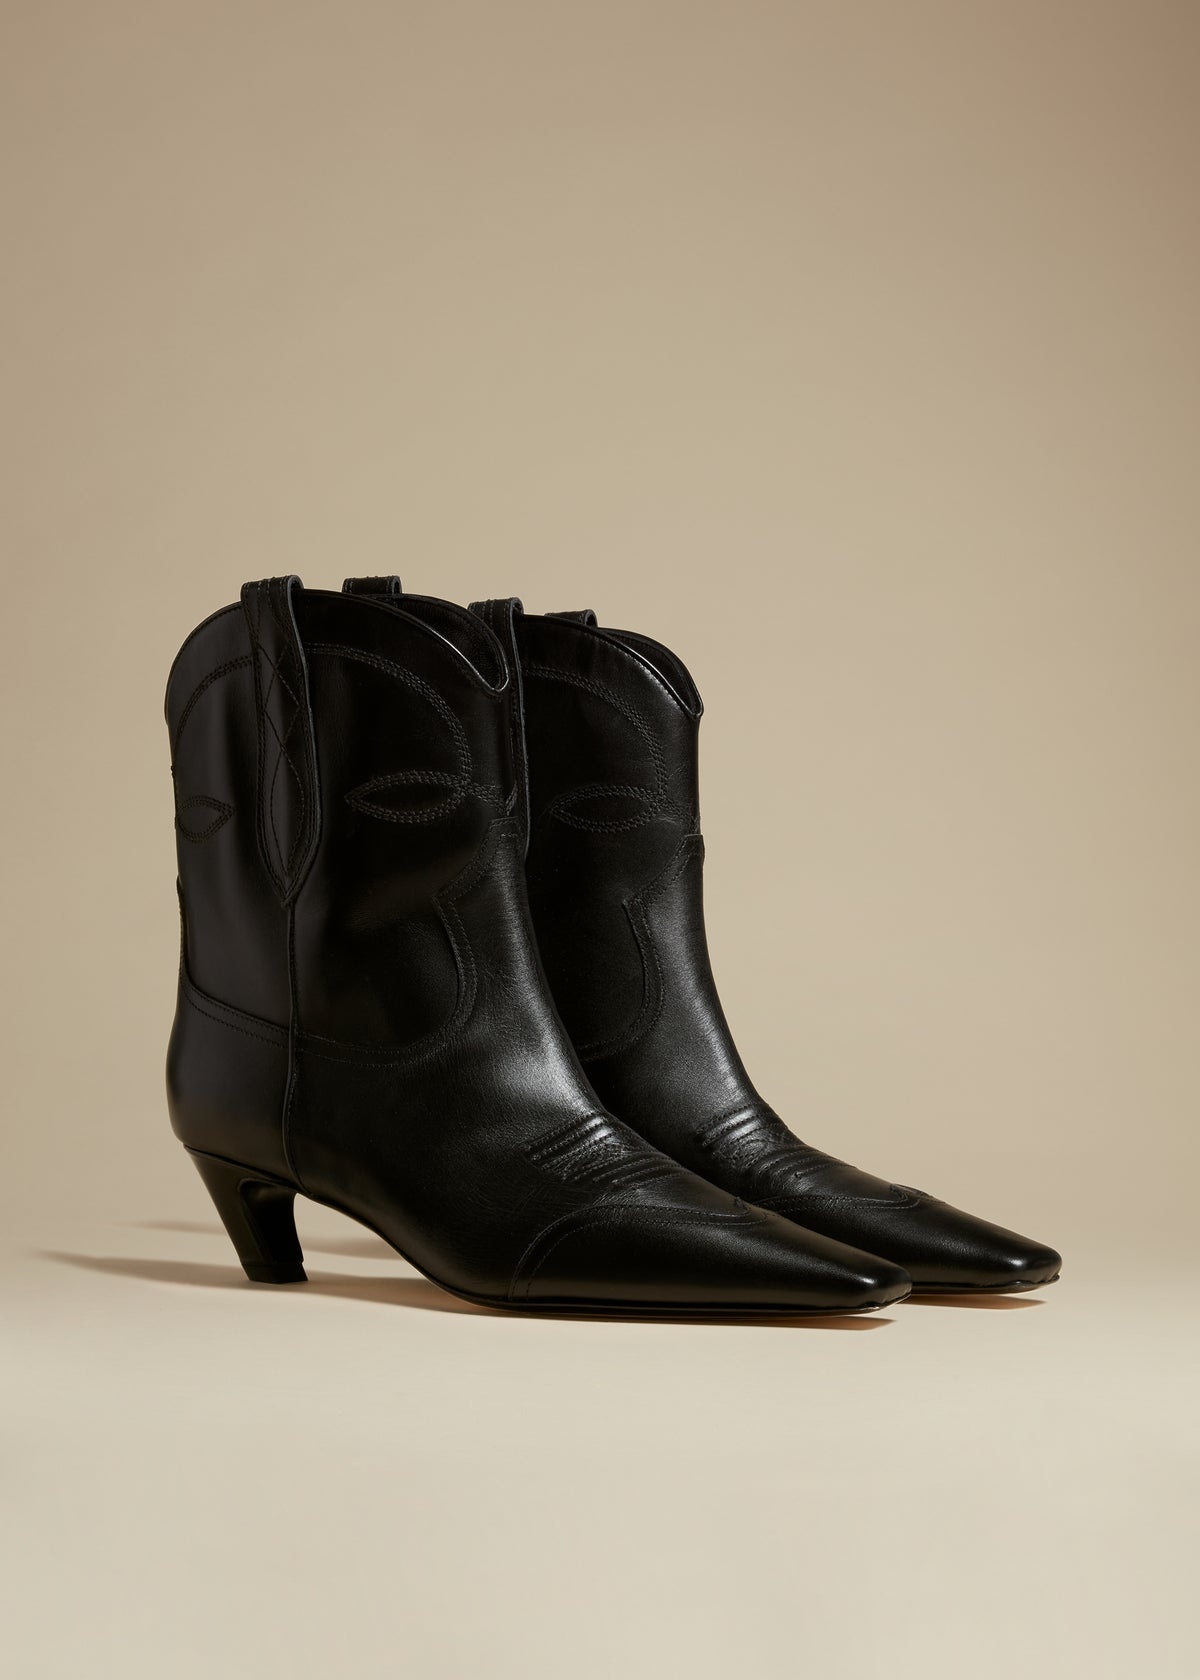 The Dallas Ankle Boot in Black Leather - 2